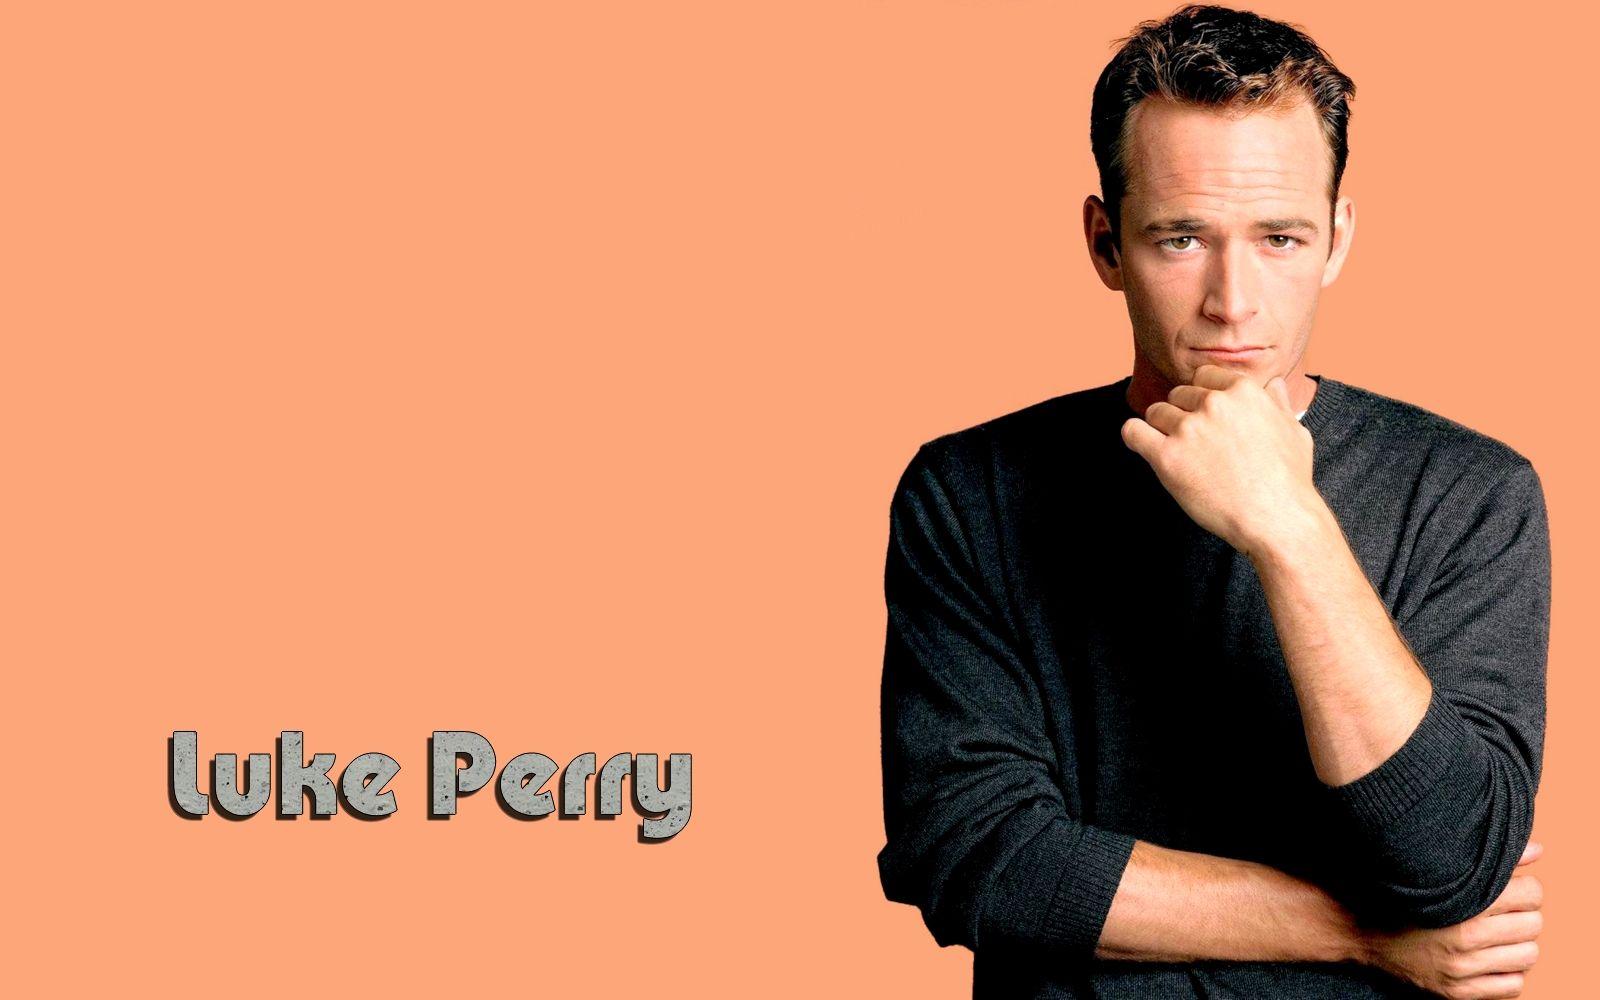 Luke Perry Wallpapers, Luke Perry Wallpapers For Free Download.